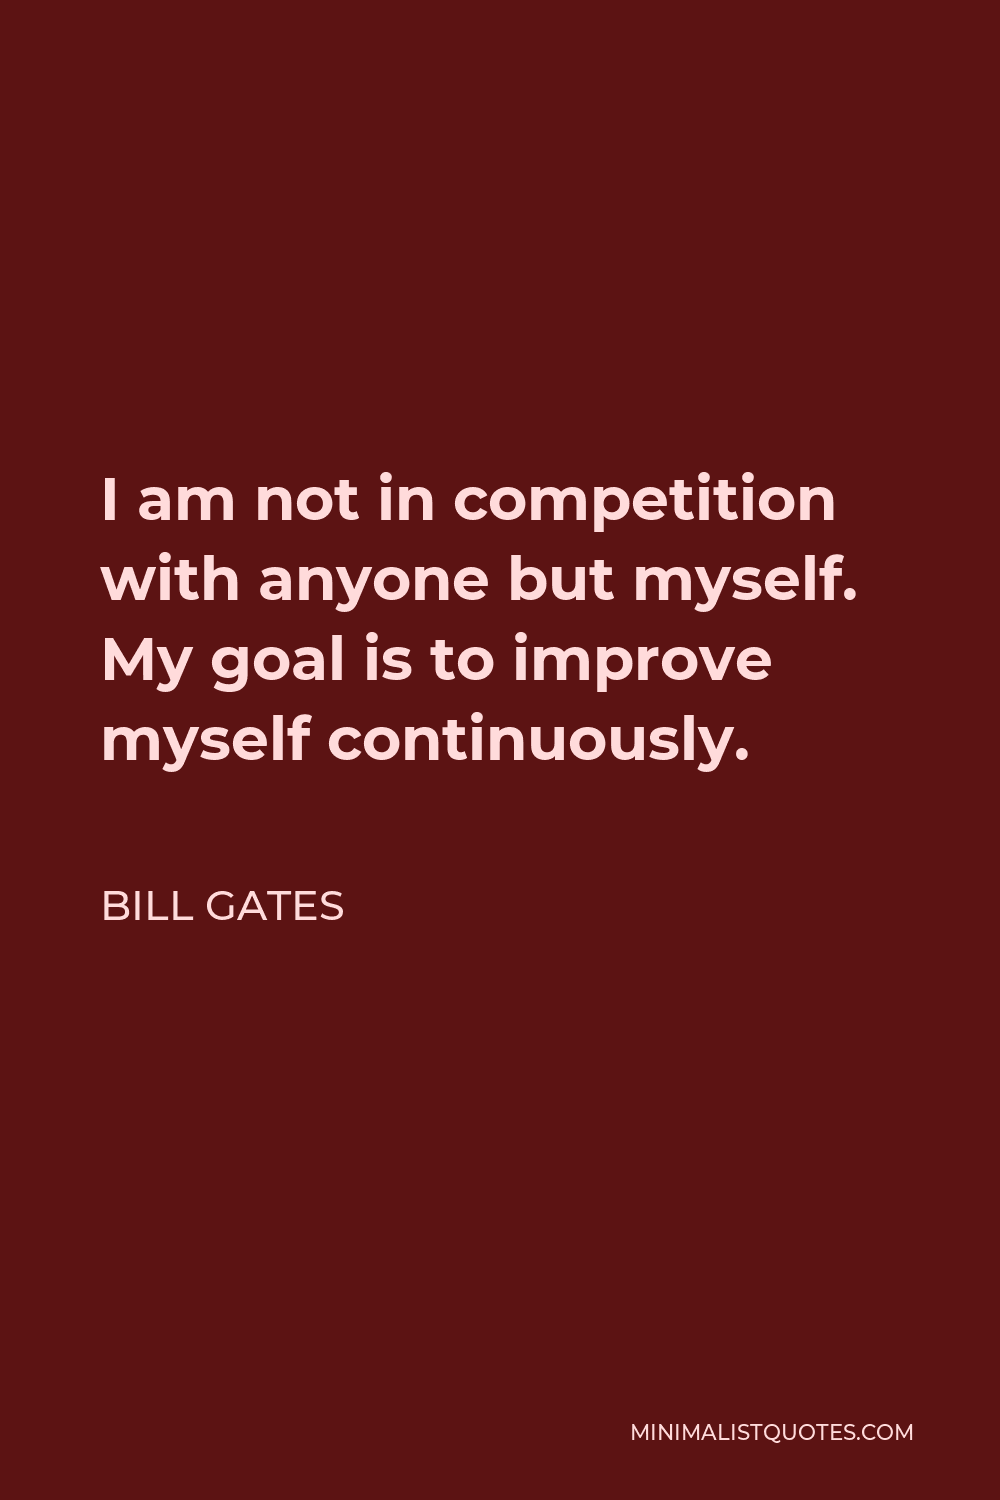 Bill Gates Quote - I am not in competition with anyone but myself. My goal is to improve myself continuously.